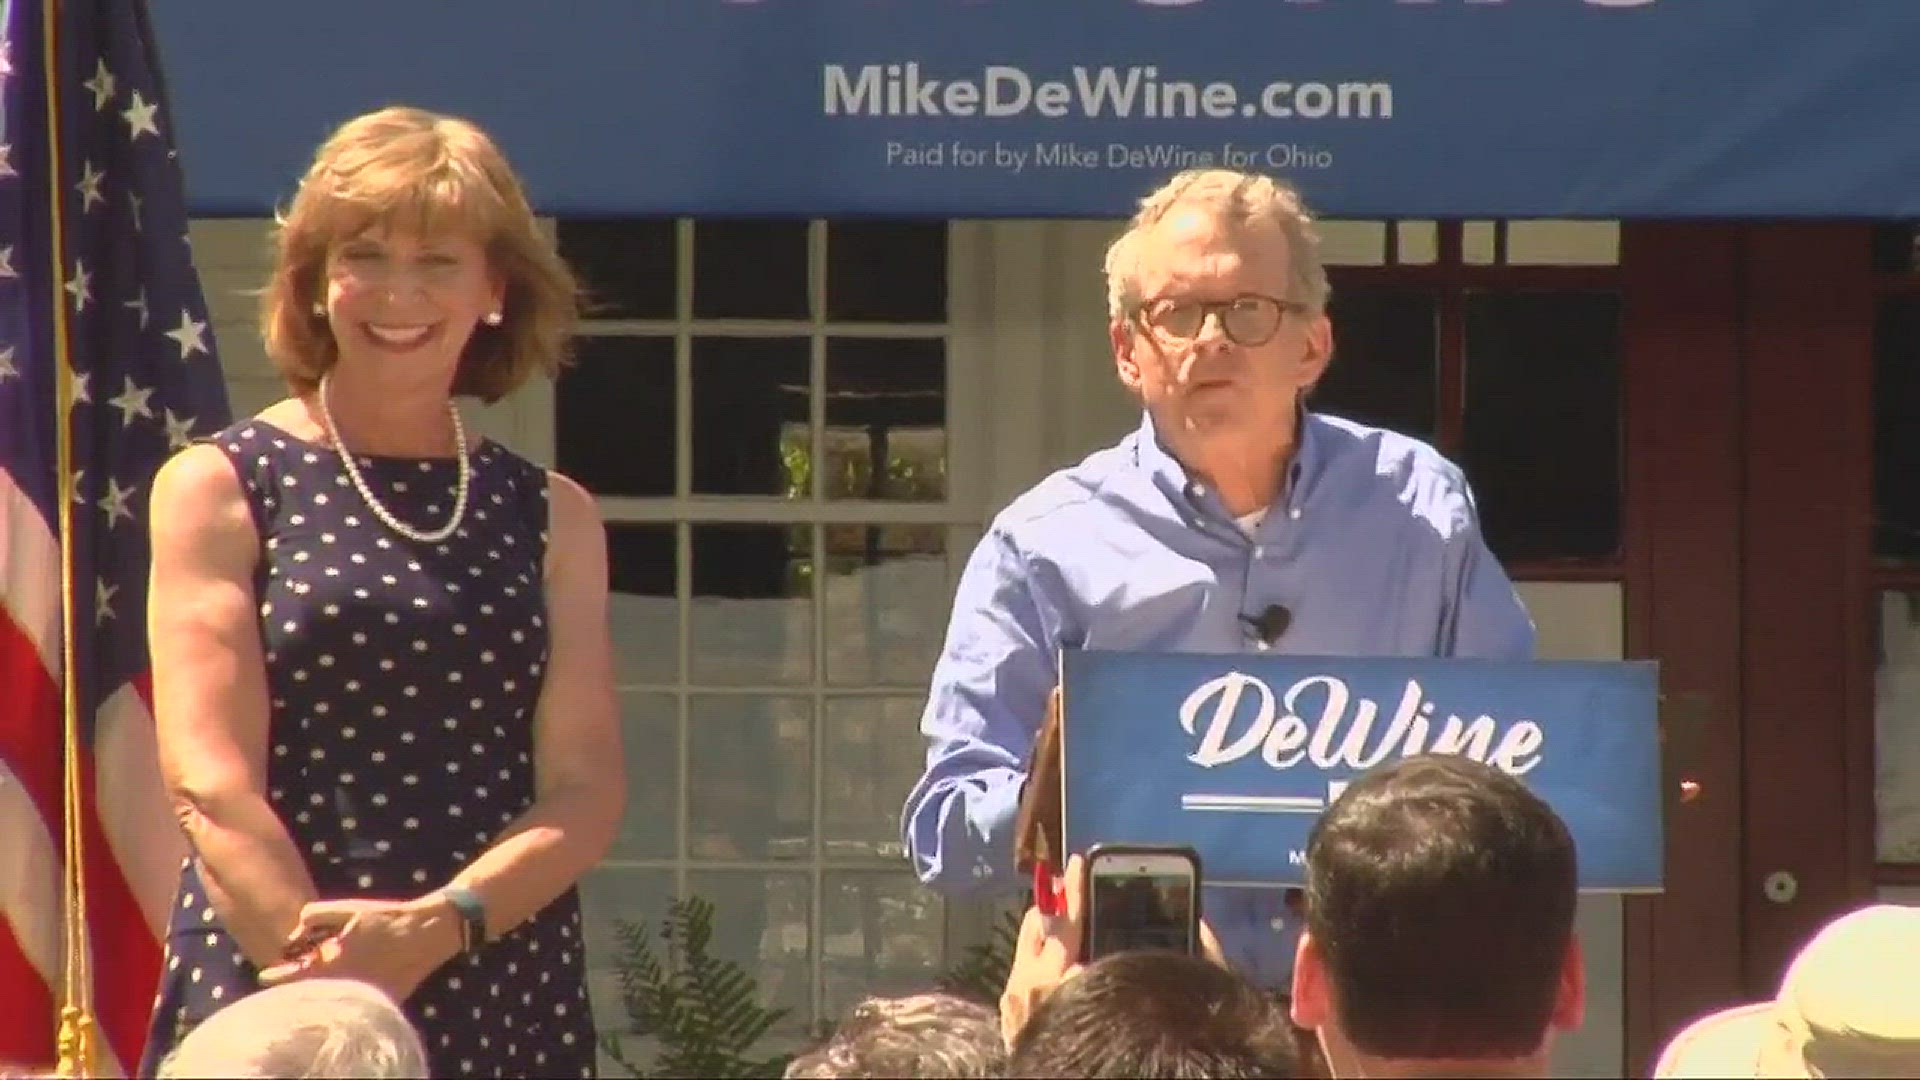 June 26, 2017: It's official. Ohio Attorney General Mike DeWine has joined the crowded field of candidates to become the state's next governor.